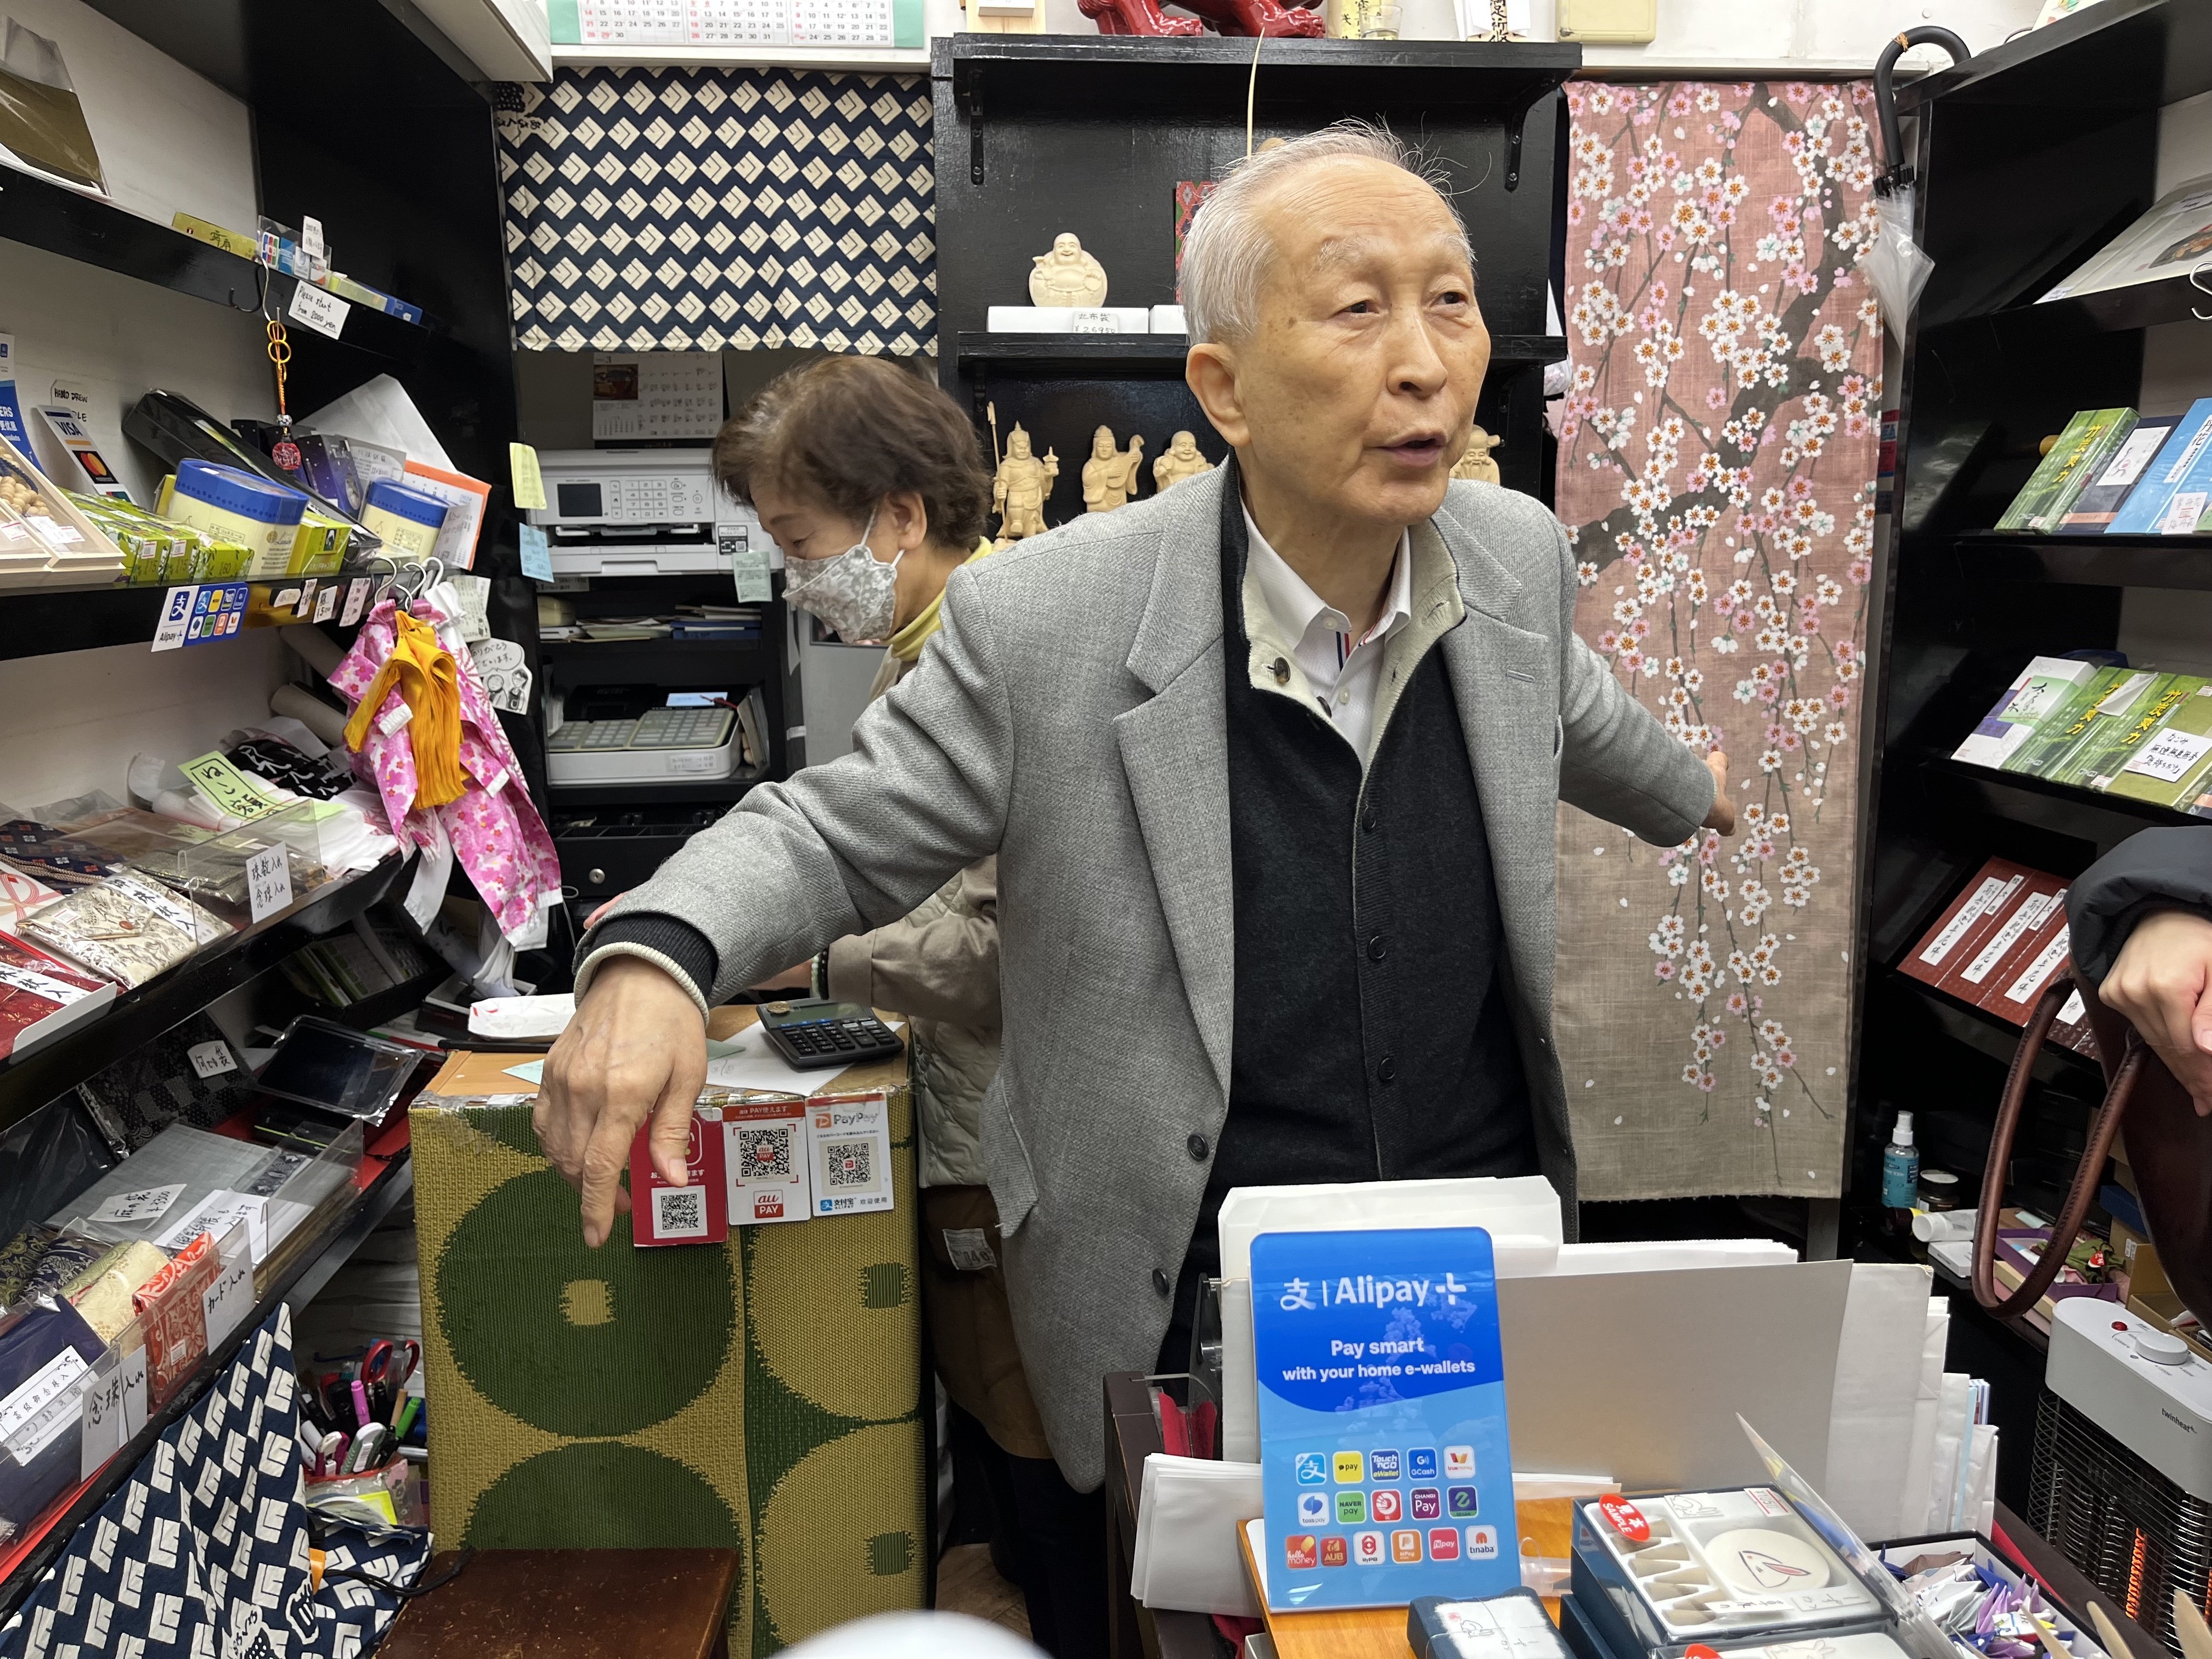 Alipay+ lets smaller merchants, such as this shop in Tokyo, accept payments made using foreign digital wallets. Photo: Xinmei Shen